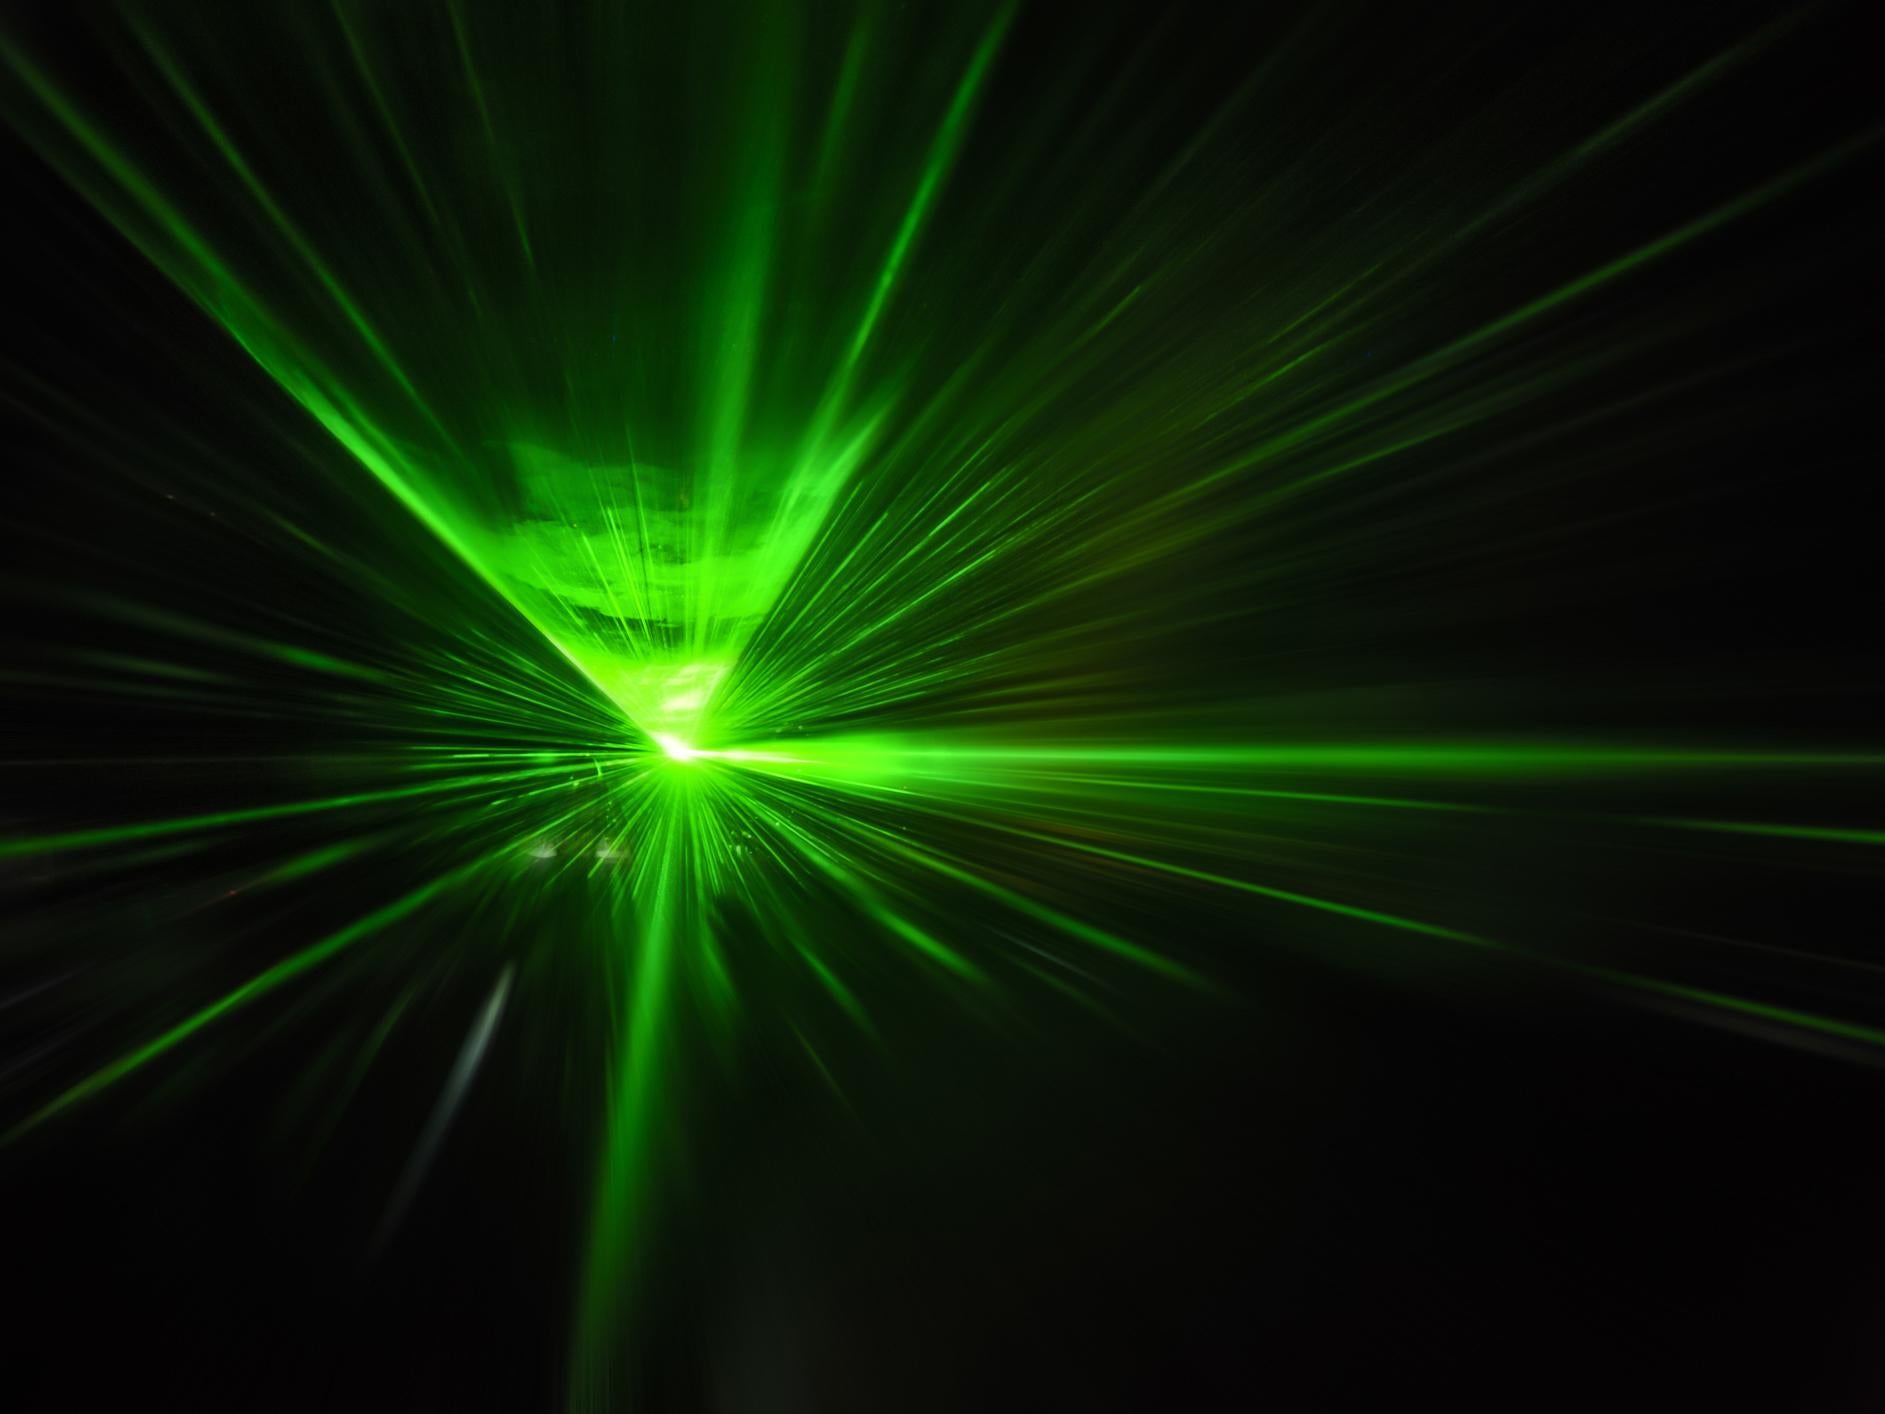 Physicists have used a laser beam one quadrillion times brighter than the Sun to stop the movement of electrons